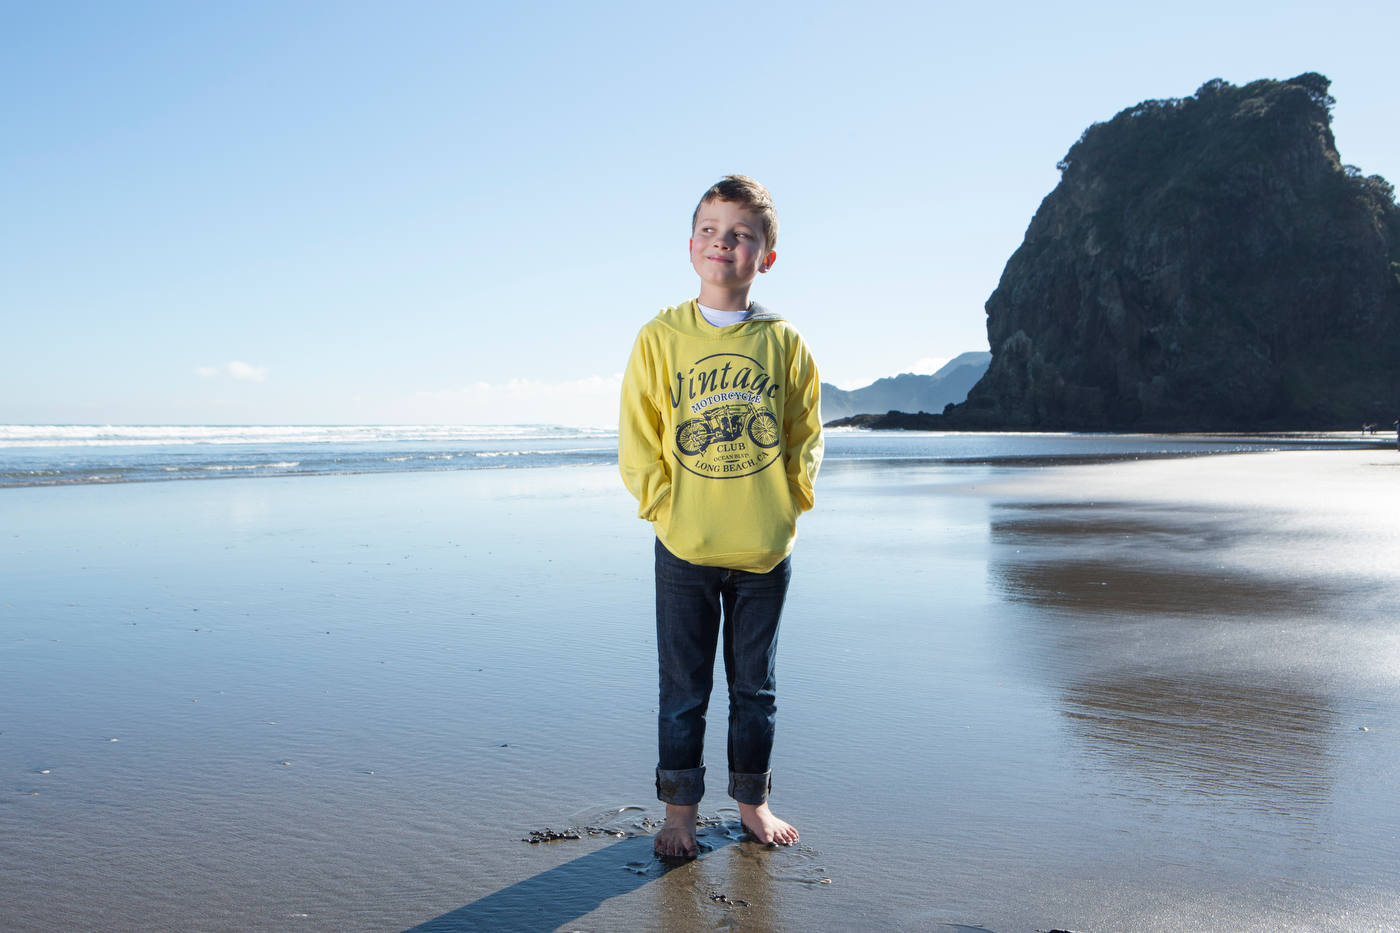 Louis, cochlear implant recipient, New Zealand.